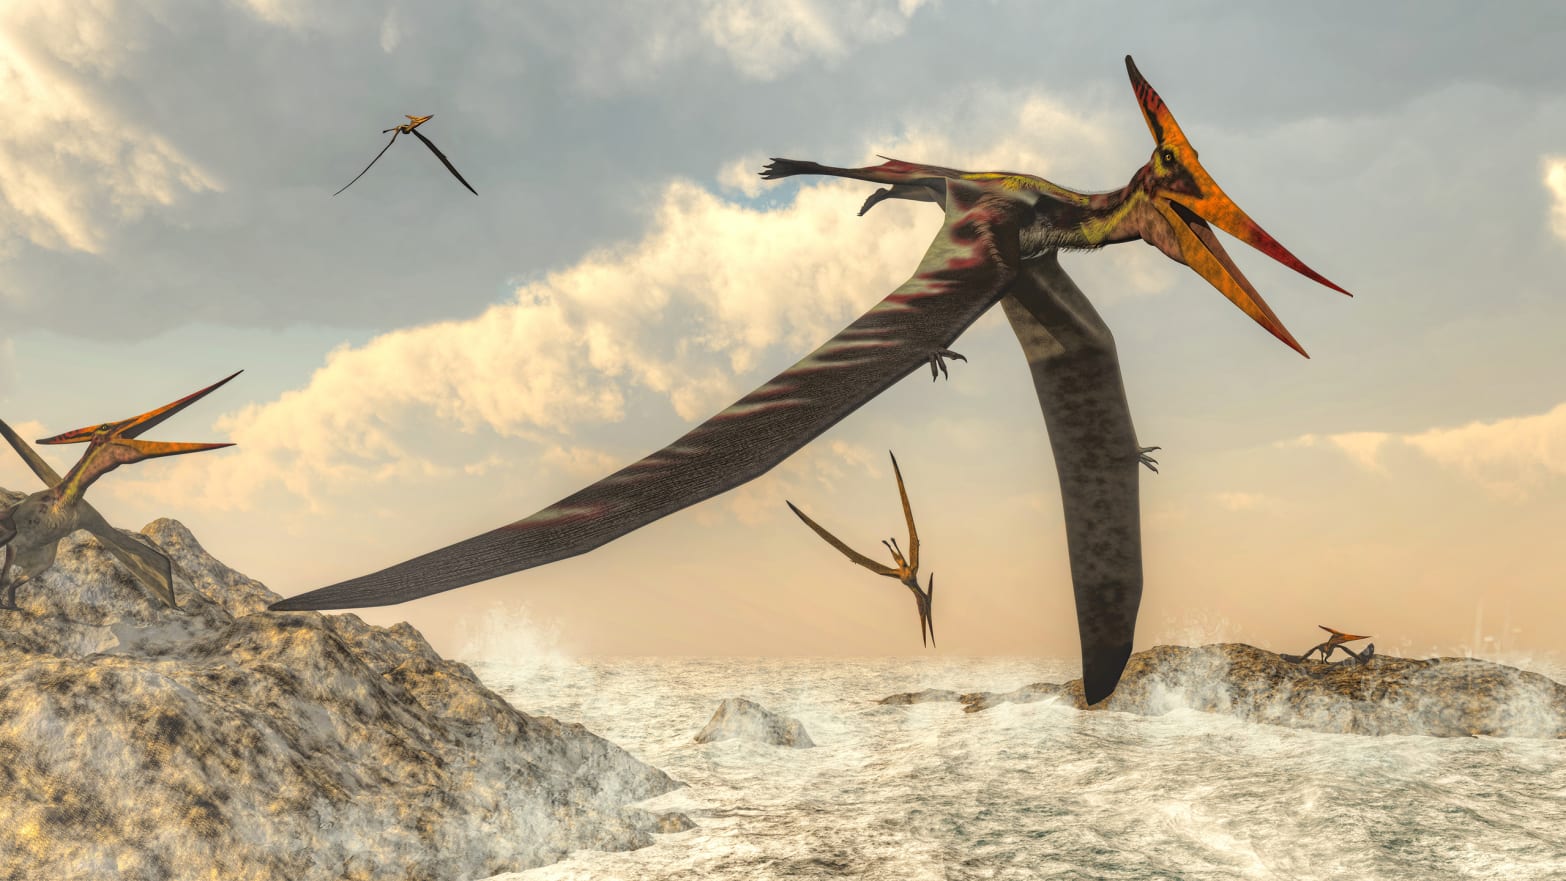 Could Baby Pterosaurs Fly? A Massive Fossil Find Launches Fresh Debate